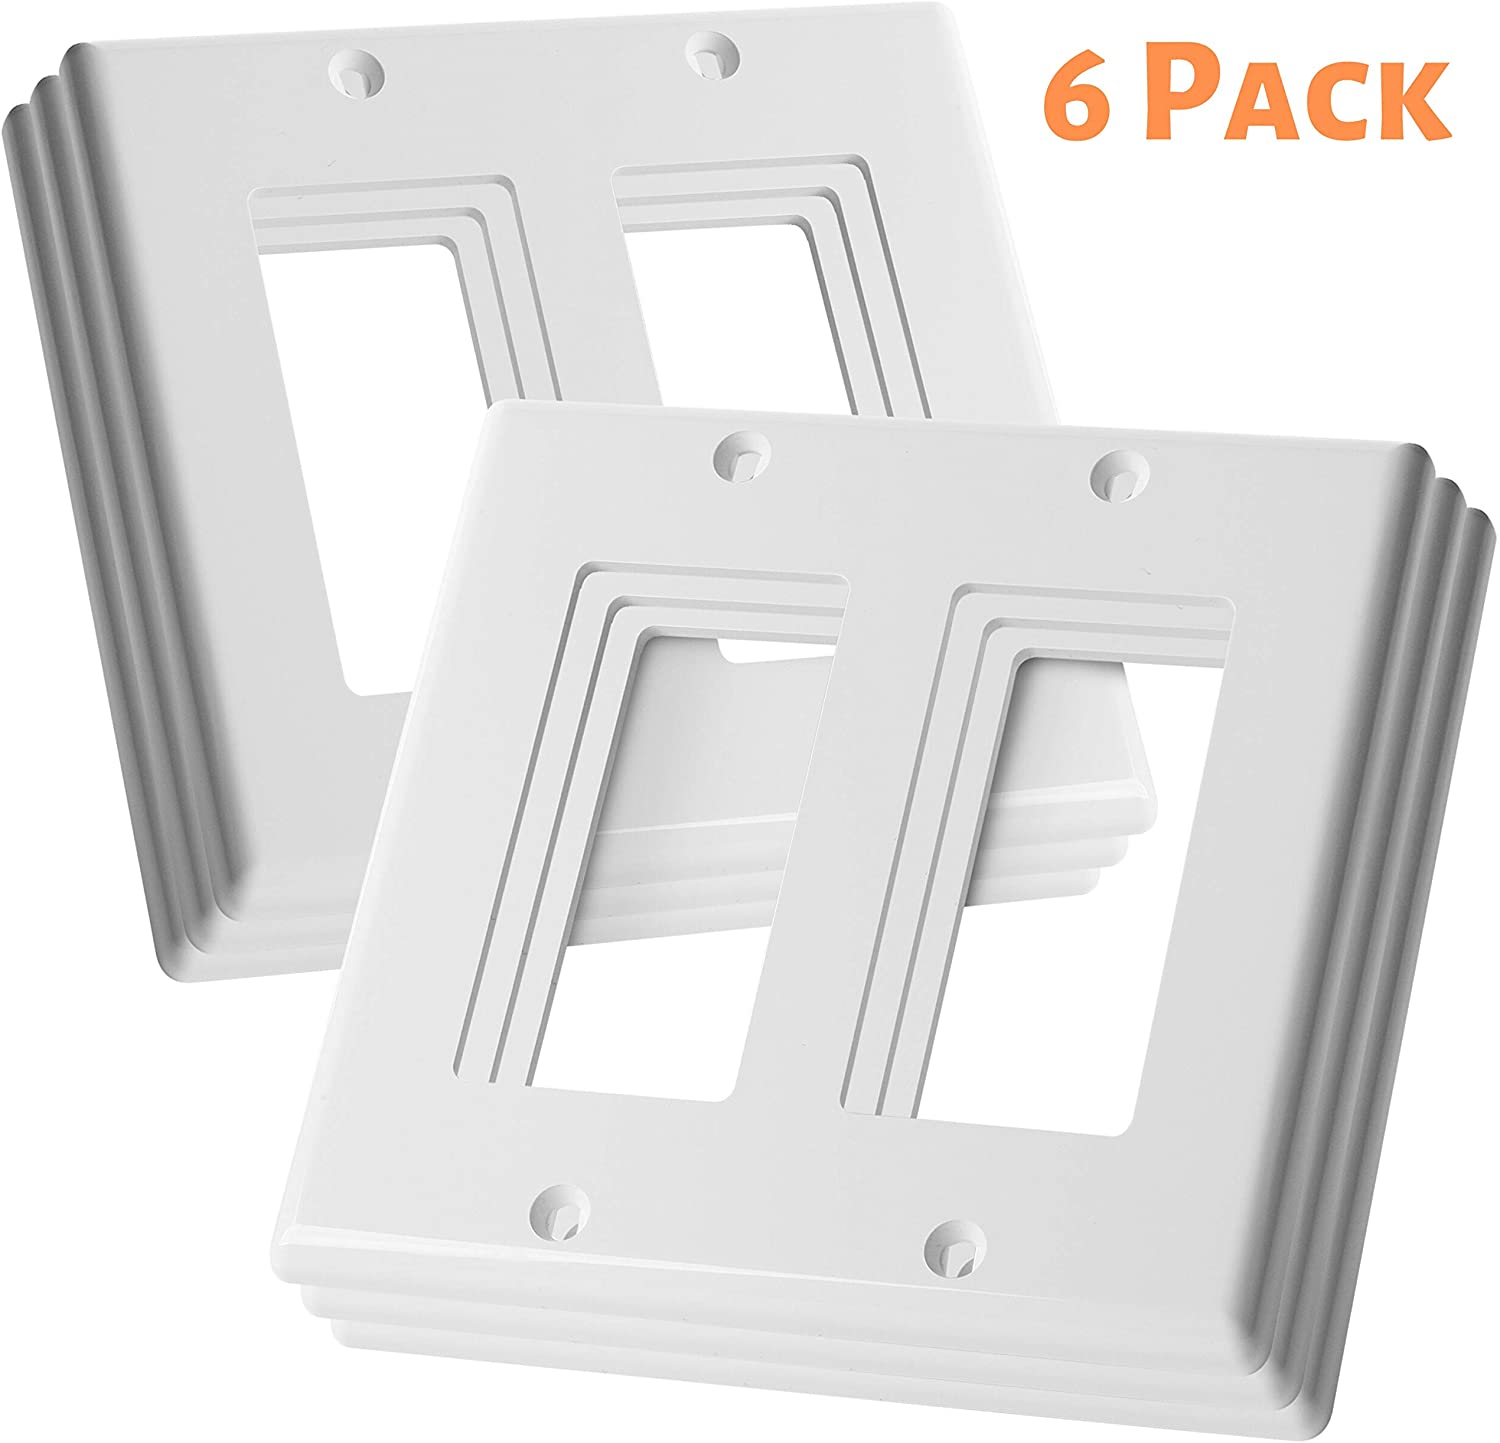 White electrical socket blanking plates covers single double gang 